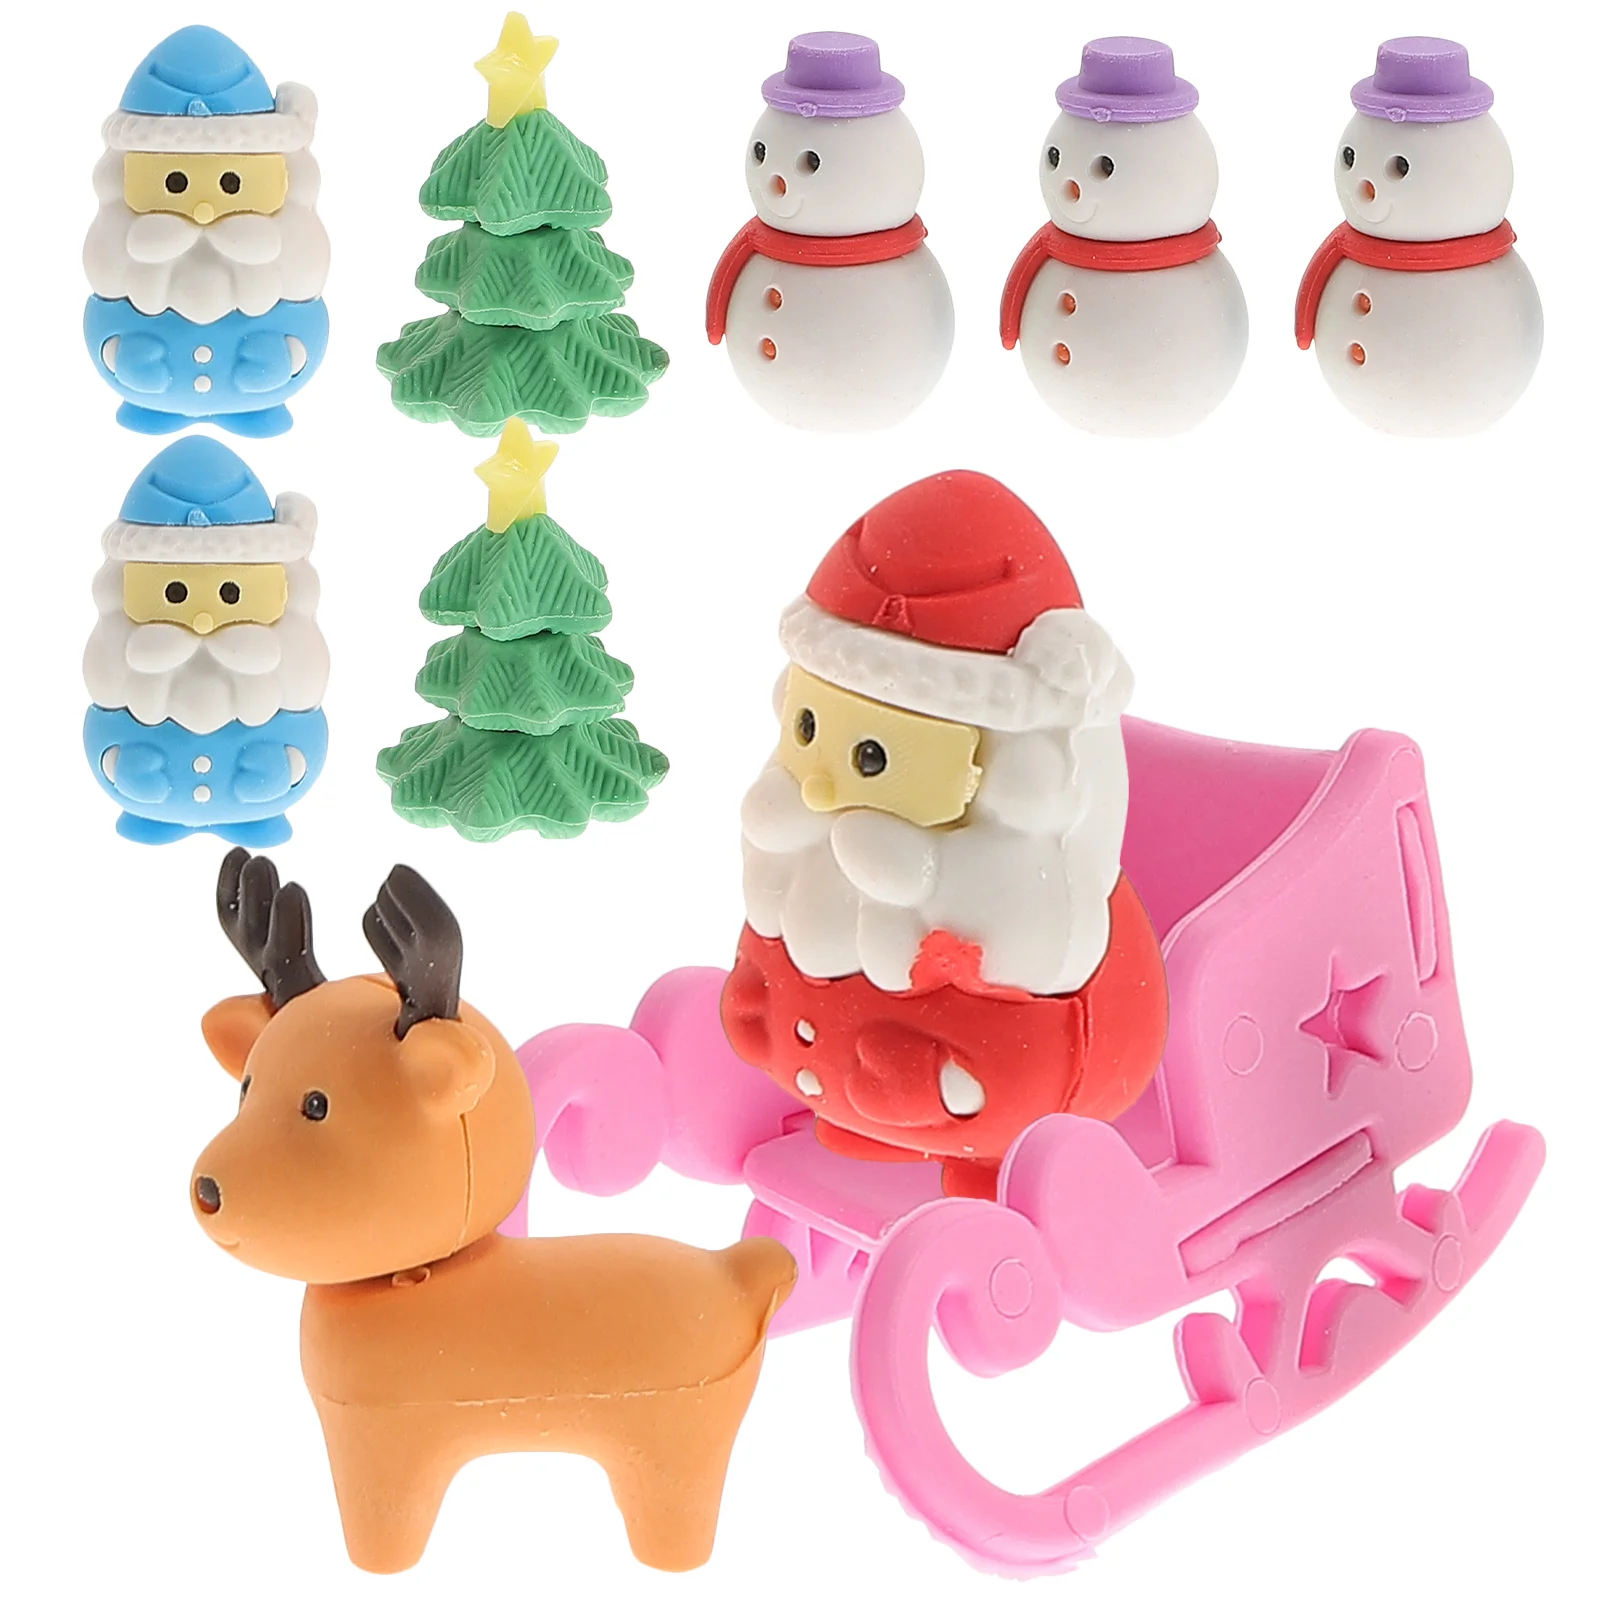 

Erasers Eraser Christmas Kids Santa Claus Tree School Stationery Holiday Rubber Snowman Stocking Cartoon Mini Party Favors